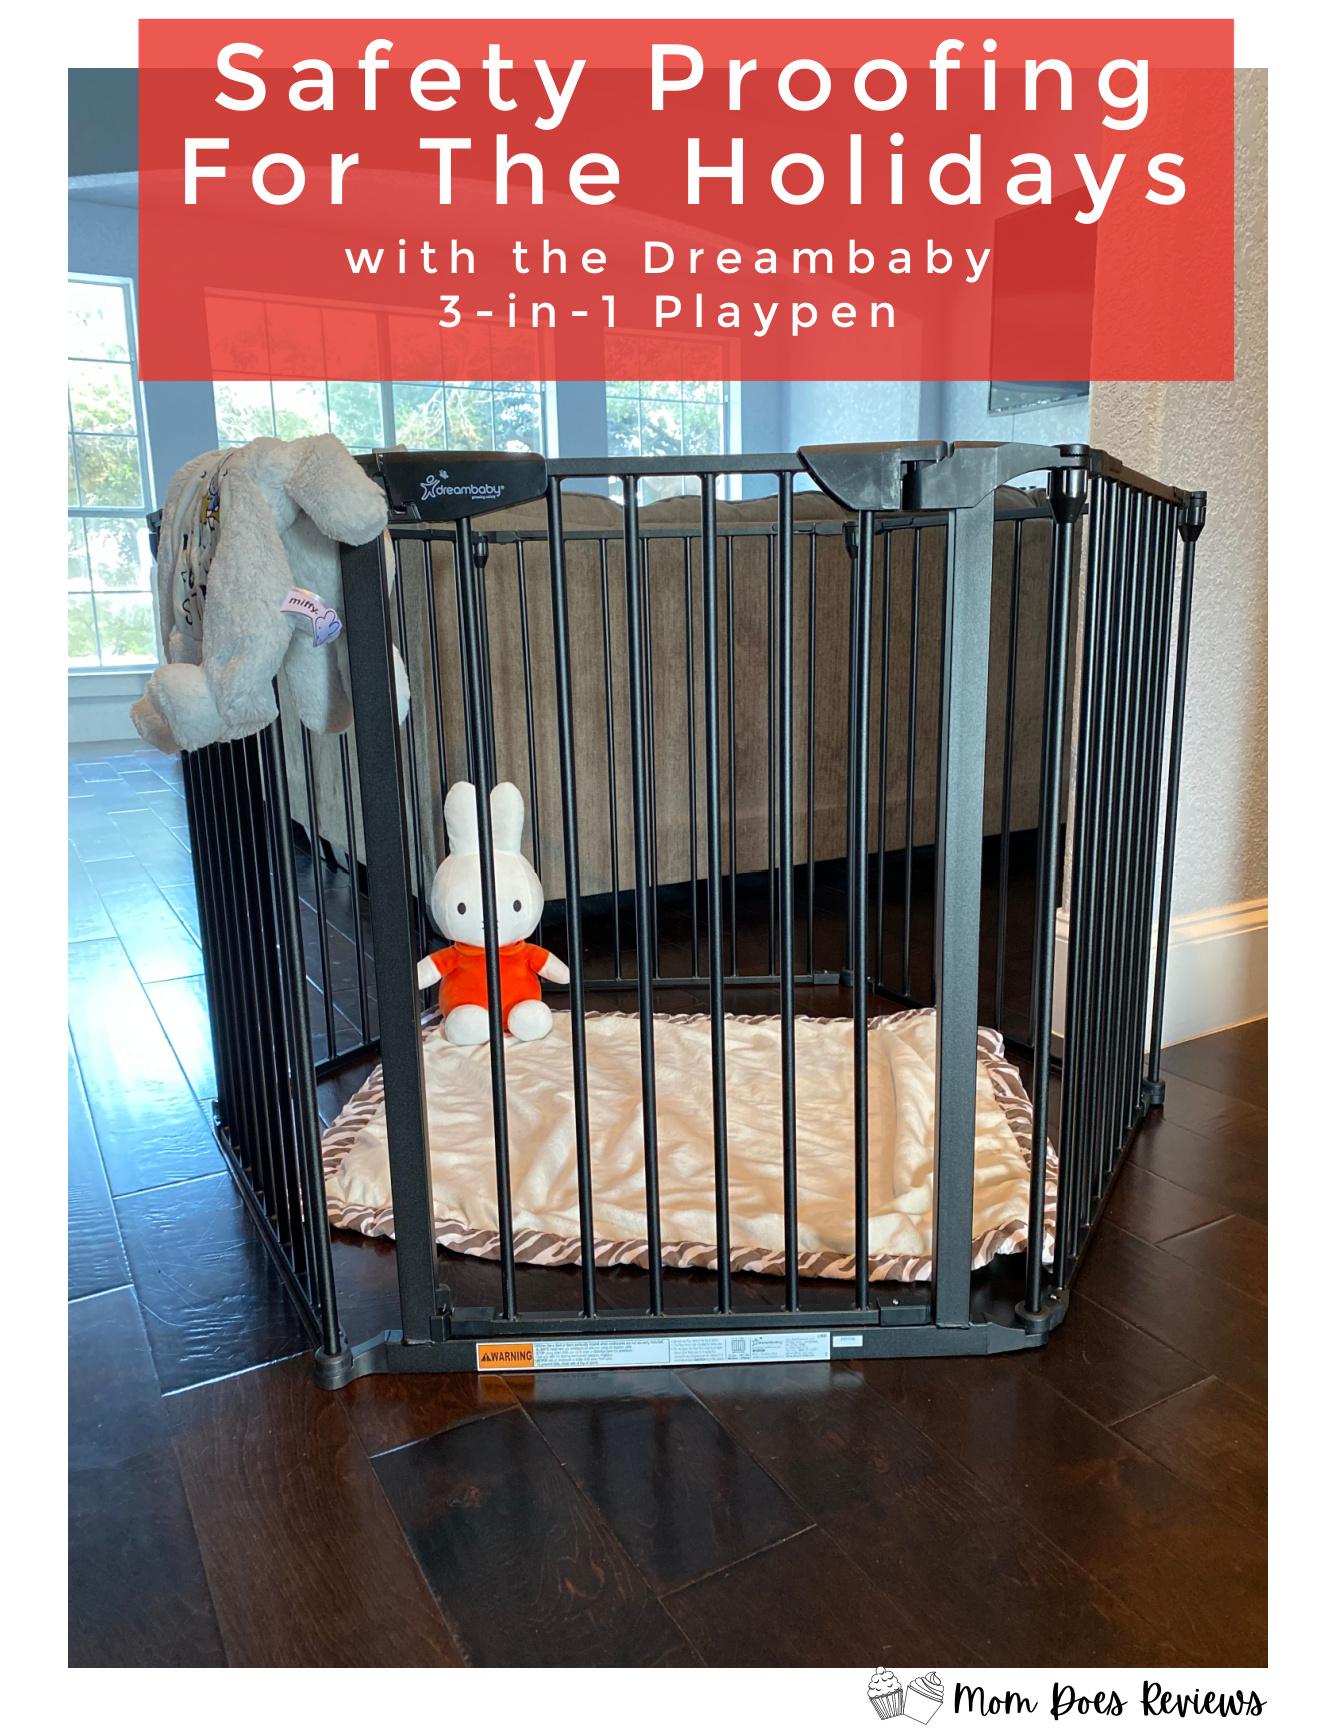 Safety proofing for the holidays with the dreambaby 3-in-1 playpenSafety proofing for the holidays with the dreambaby 3-in-1 playpen